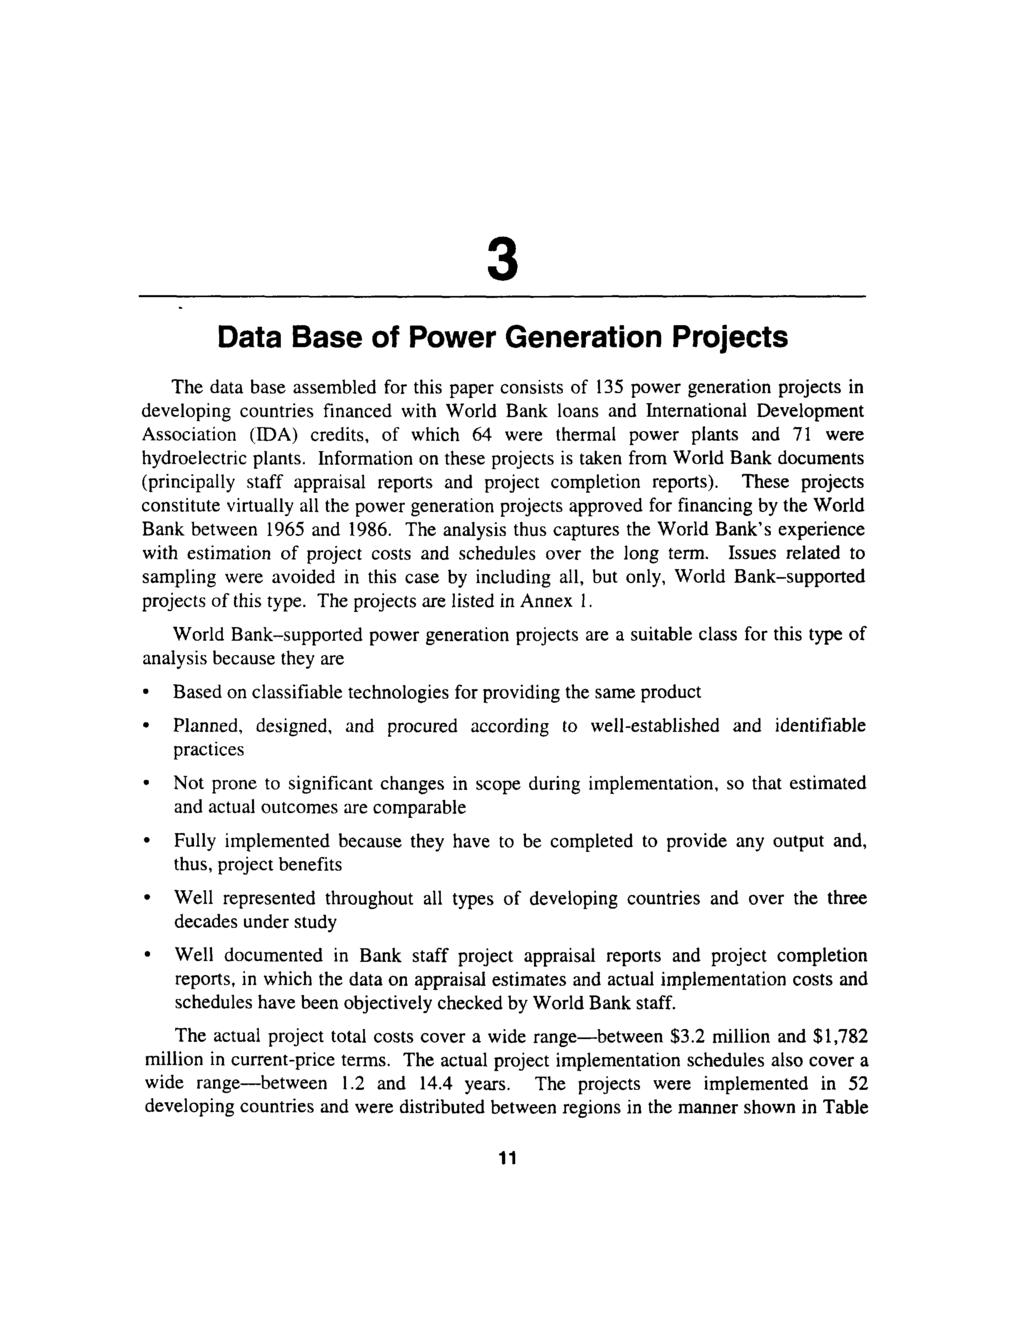 3 Data Base of Power Generation Projects The data base assembled for this paper consists of 135 power generation projects in developing countries financed with World Bank loans and International